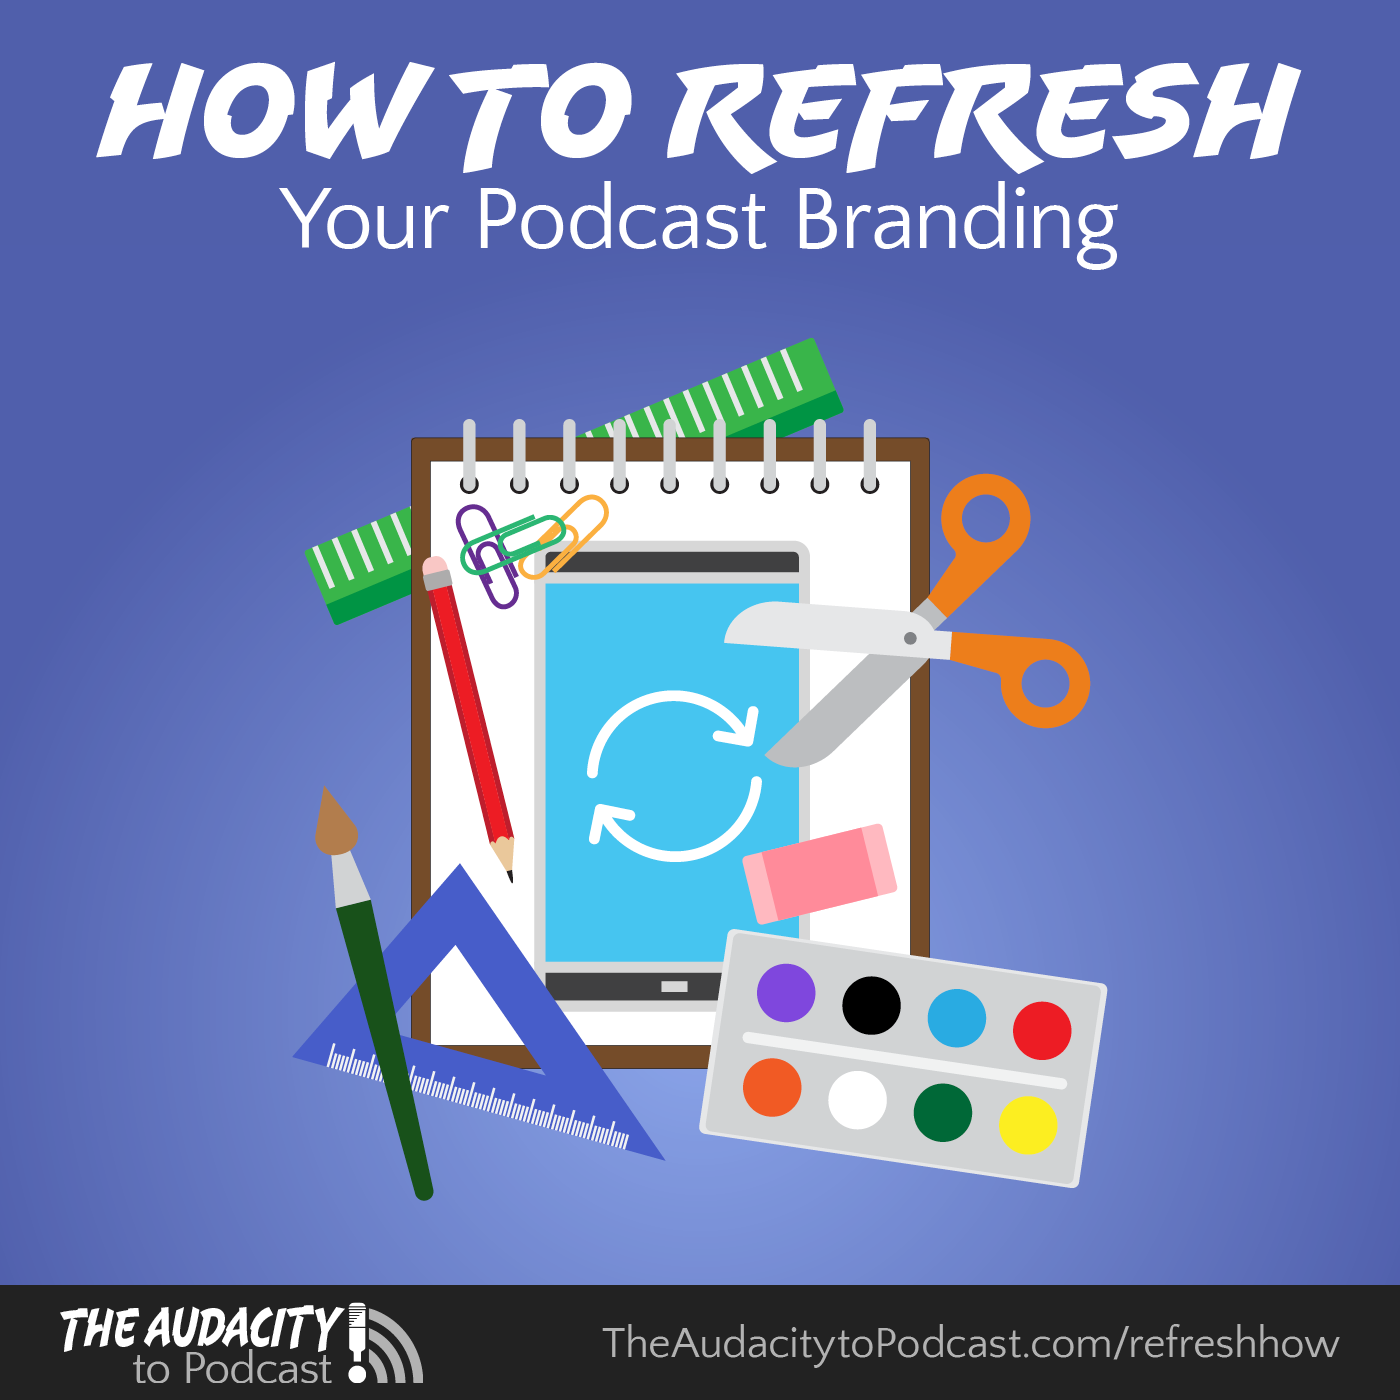 How to Refresh Your Podcast Branding